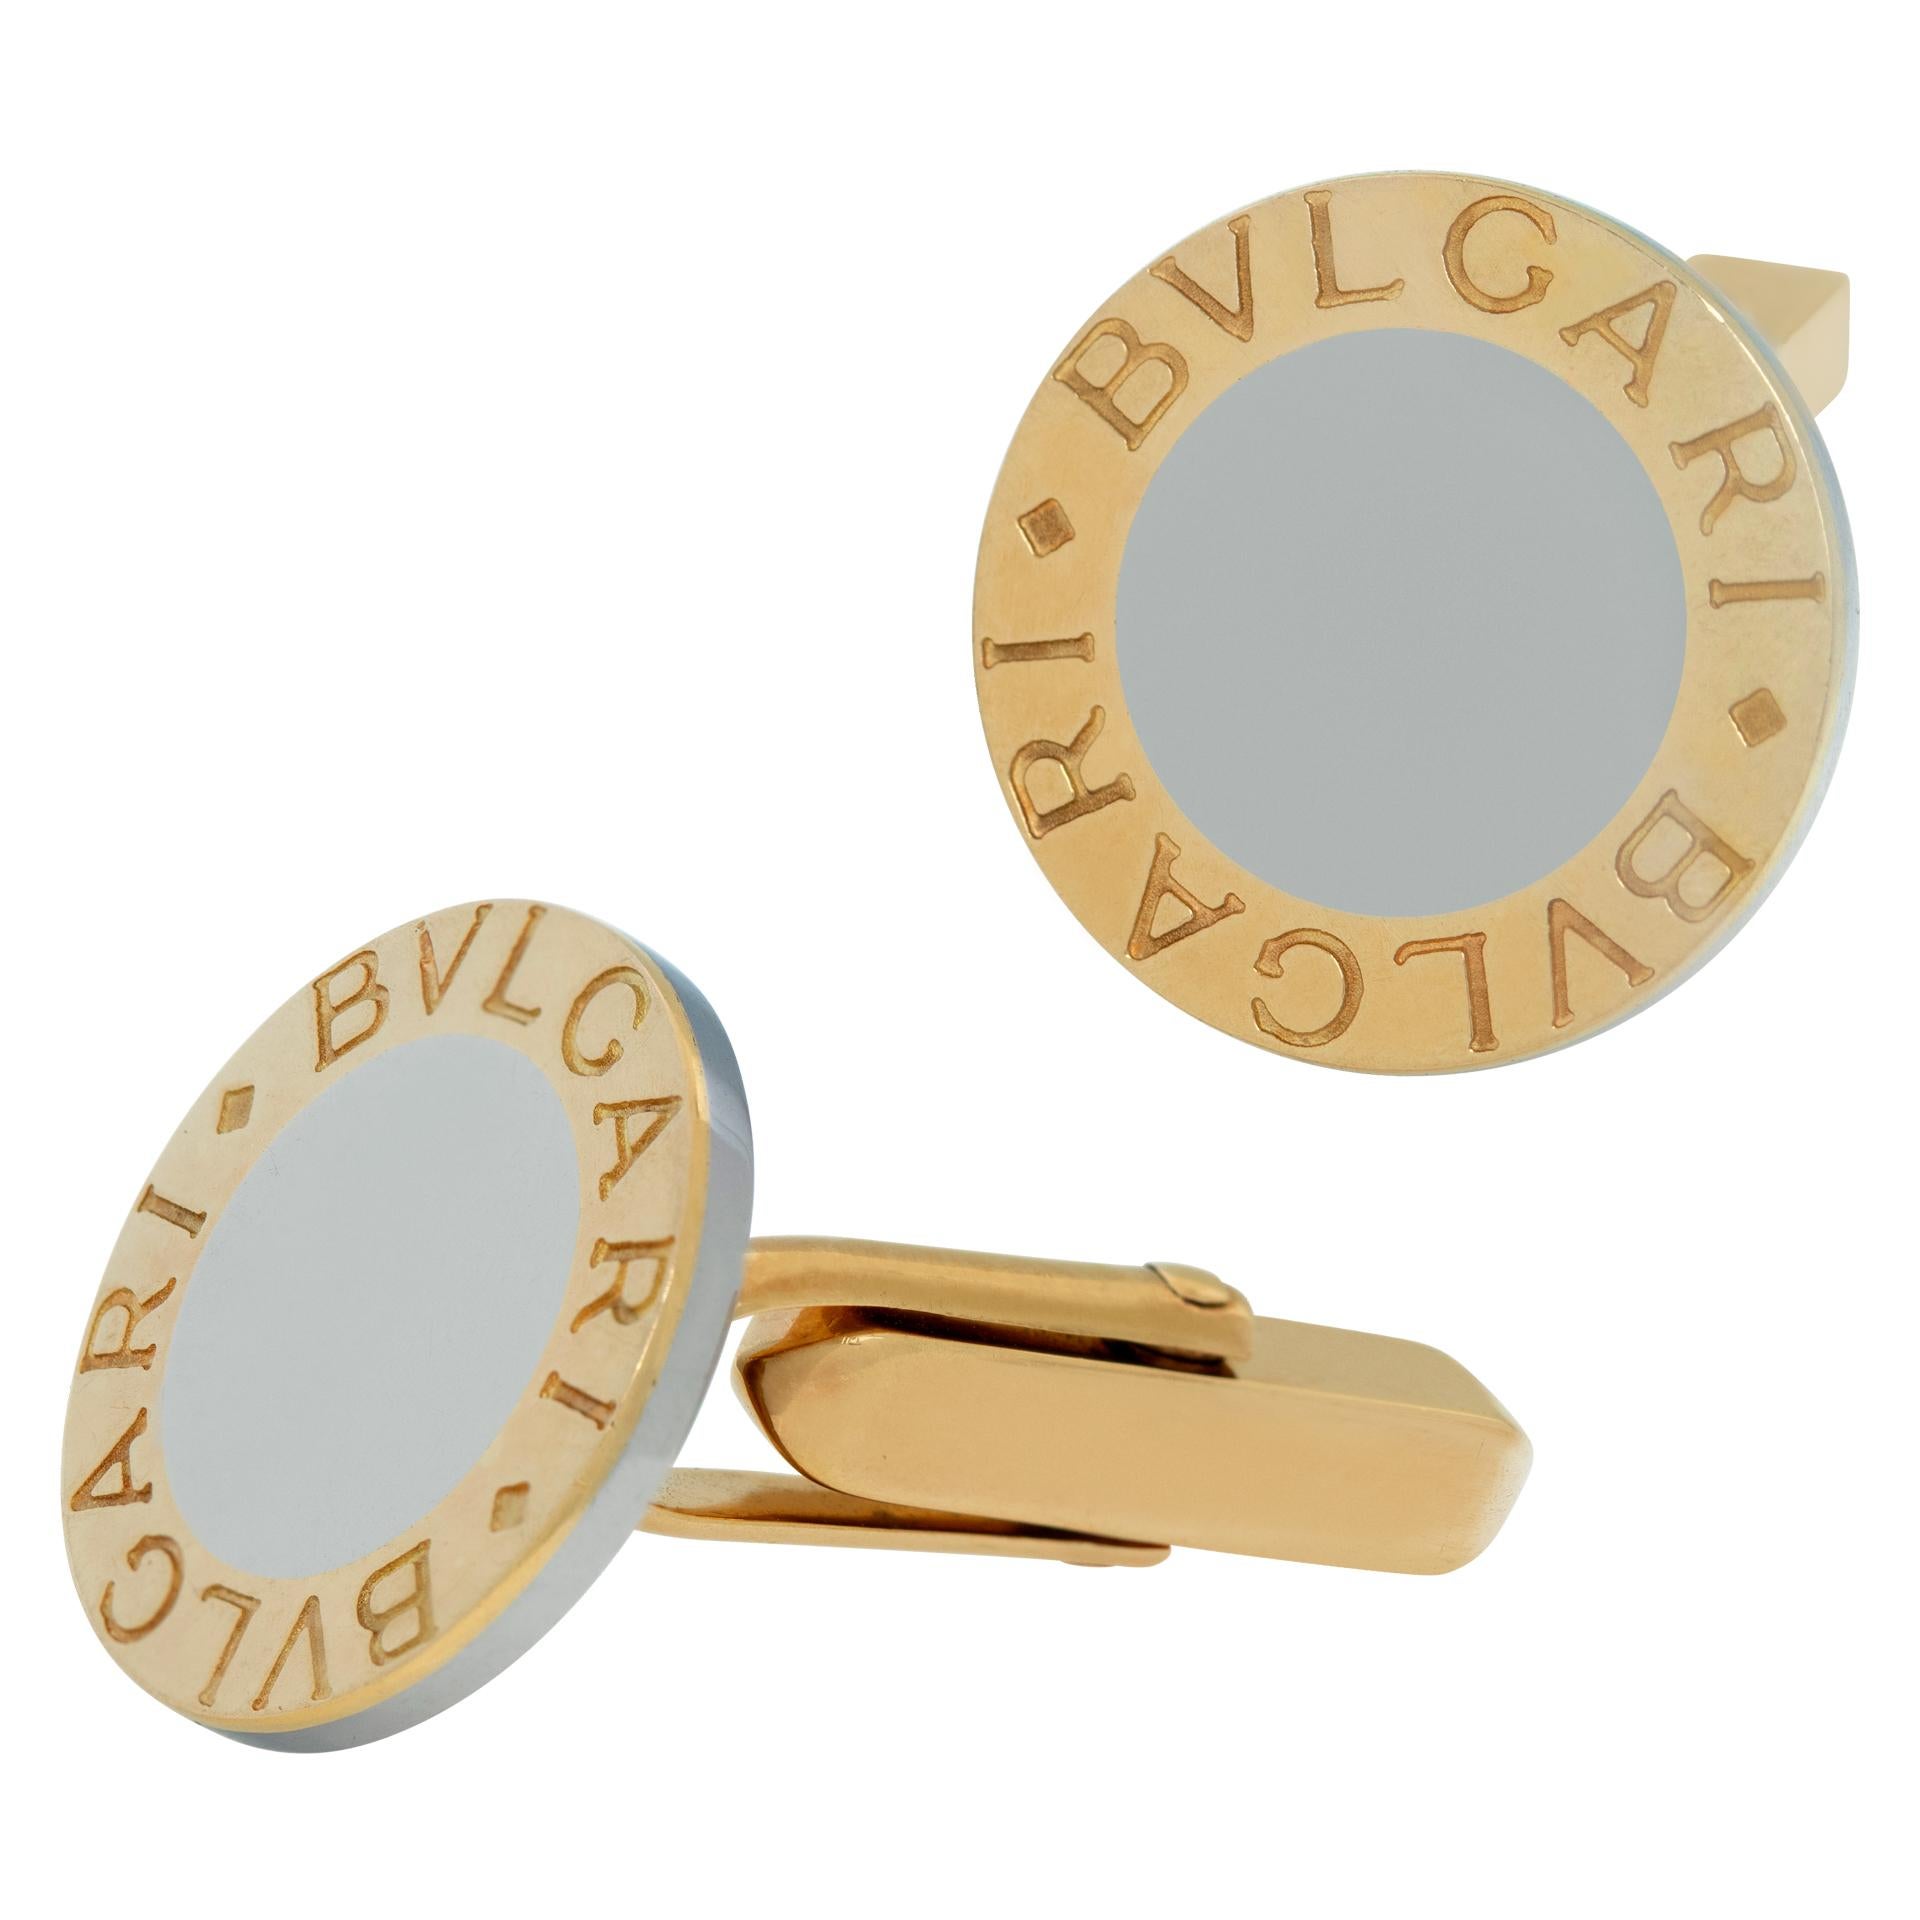 Bvlgari Two Tone 18k yellow gold and stainless steel cufflinks. Measures 1 inch.
